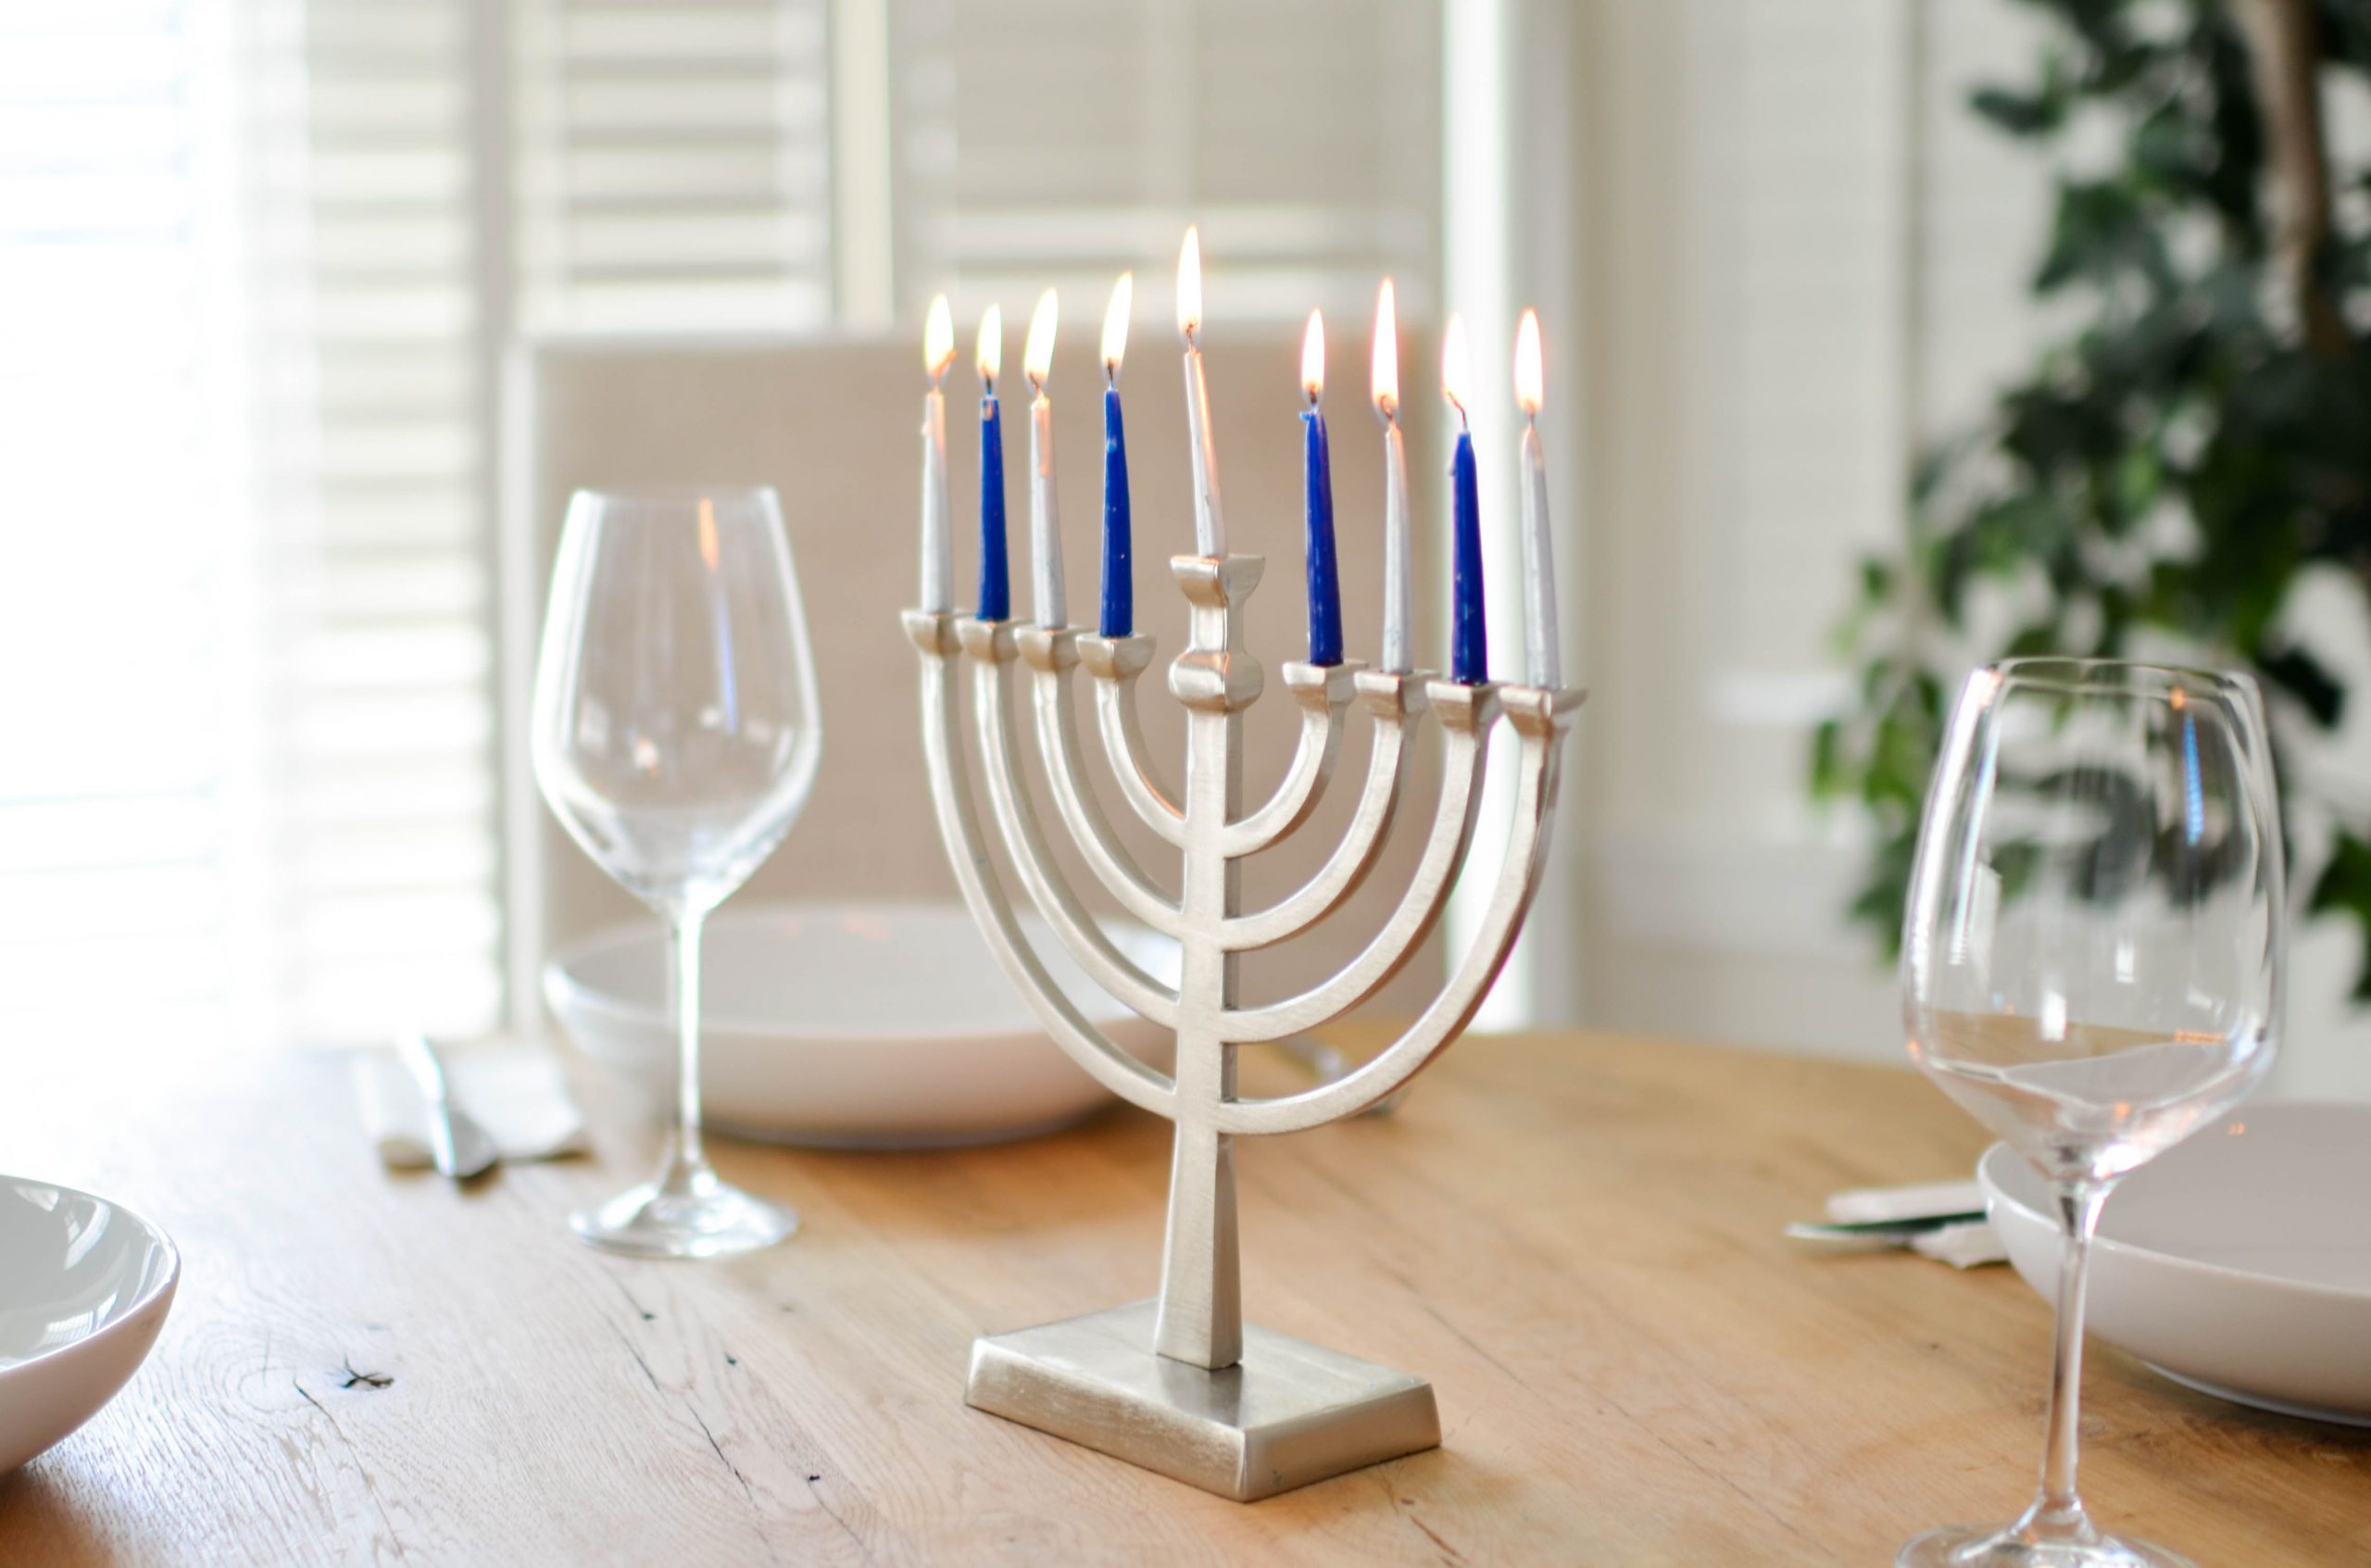 Why%20does%20Hanukkah%20begin%20on%20different%20days%20each%20year%3F%20